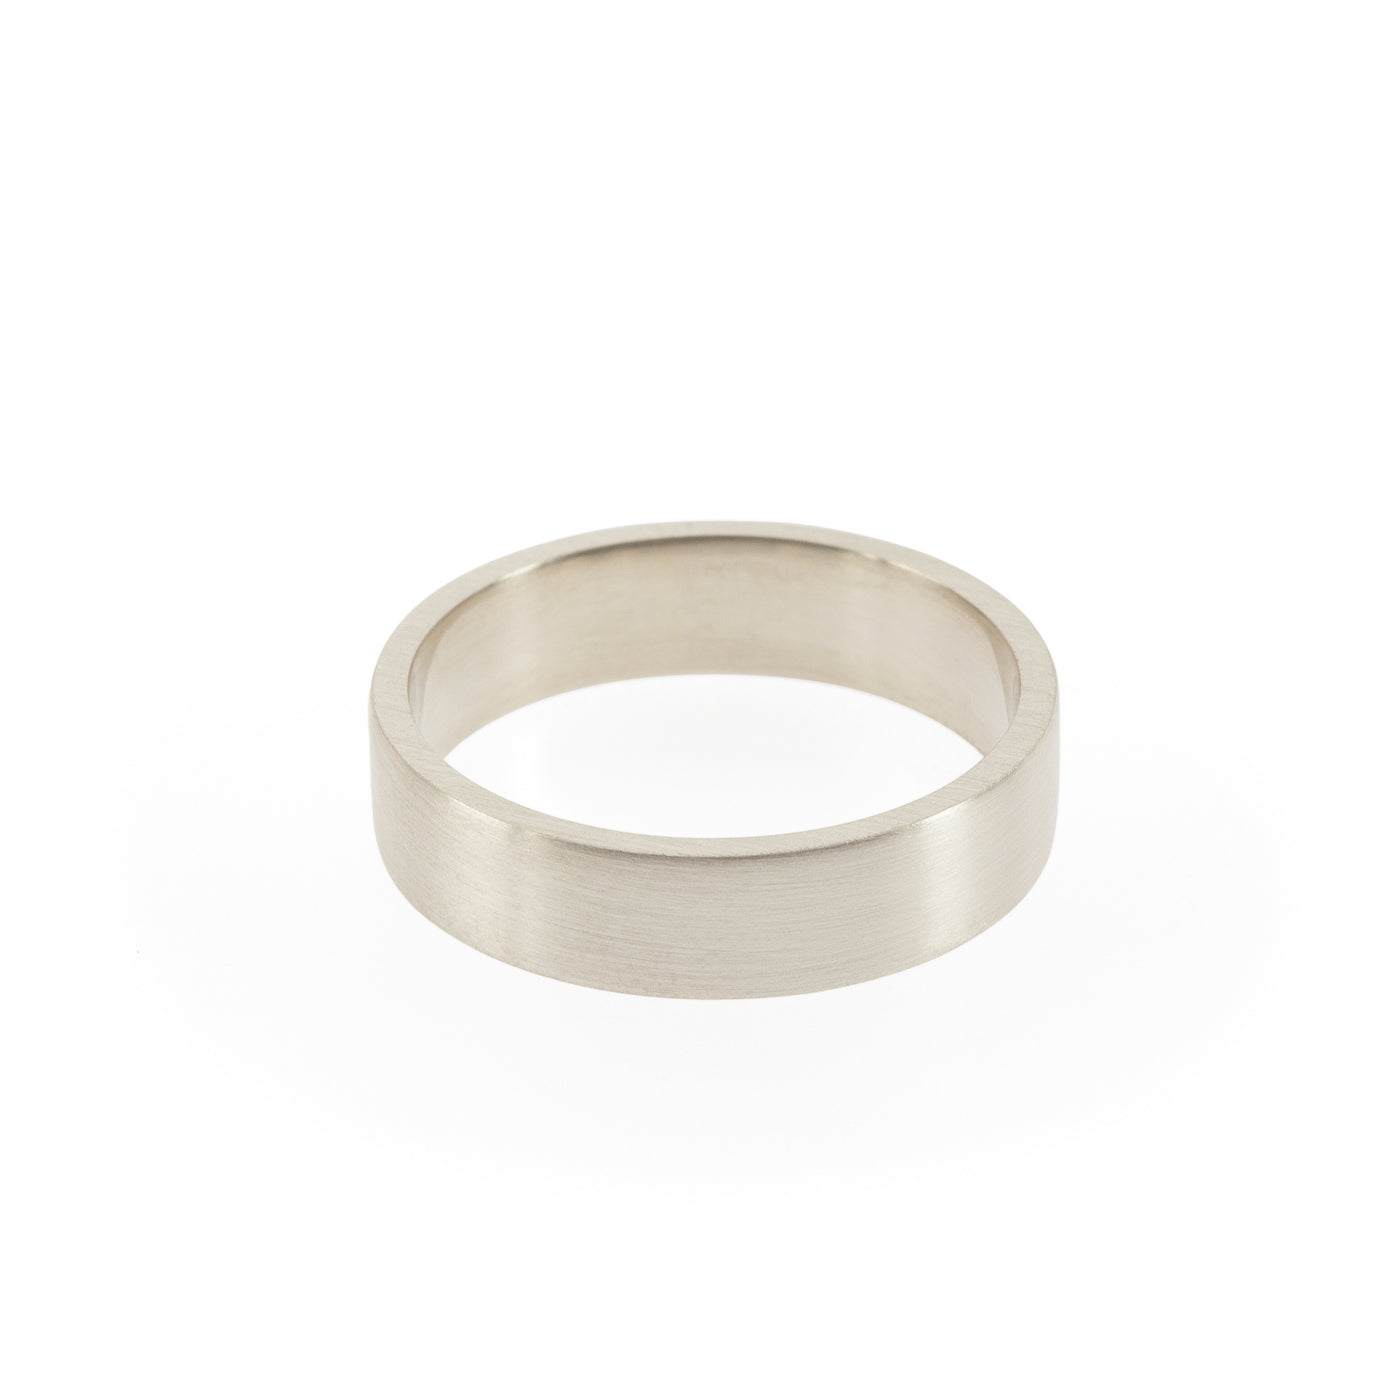 Eco-friendly silver ring. This artisan crafted Flat Band is handmade in Cape Town in recycled silver from e-waste.